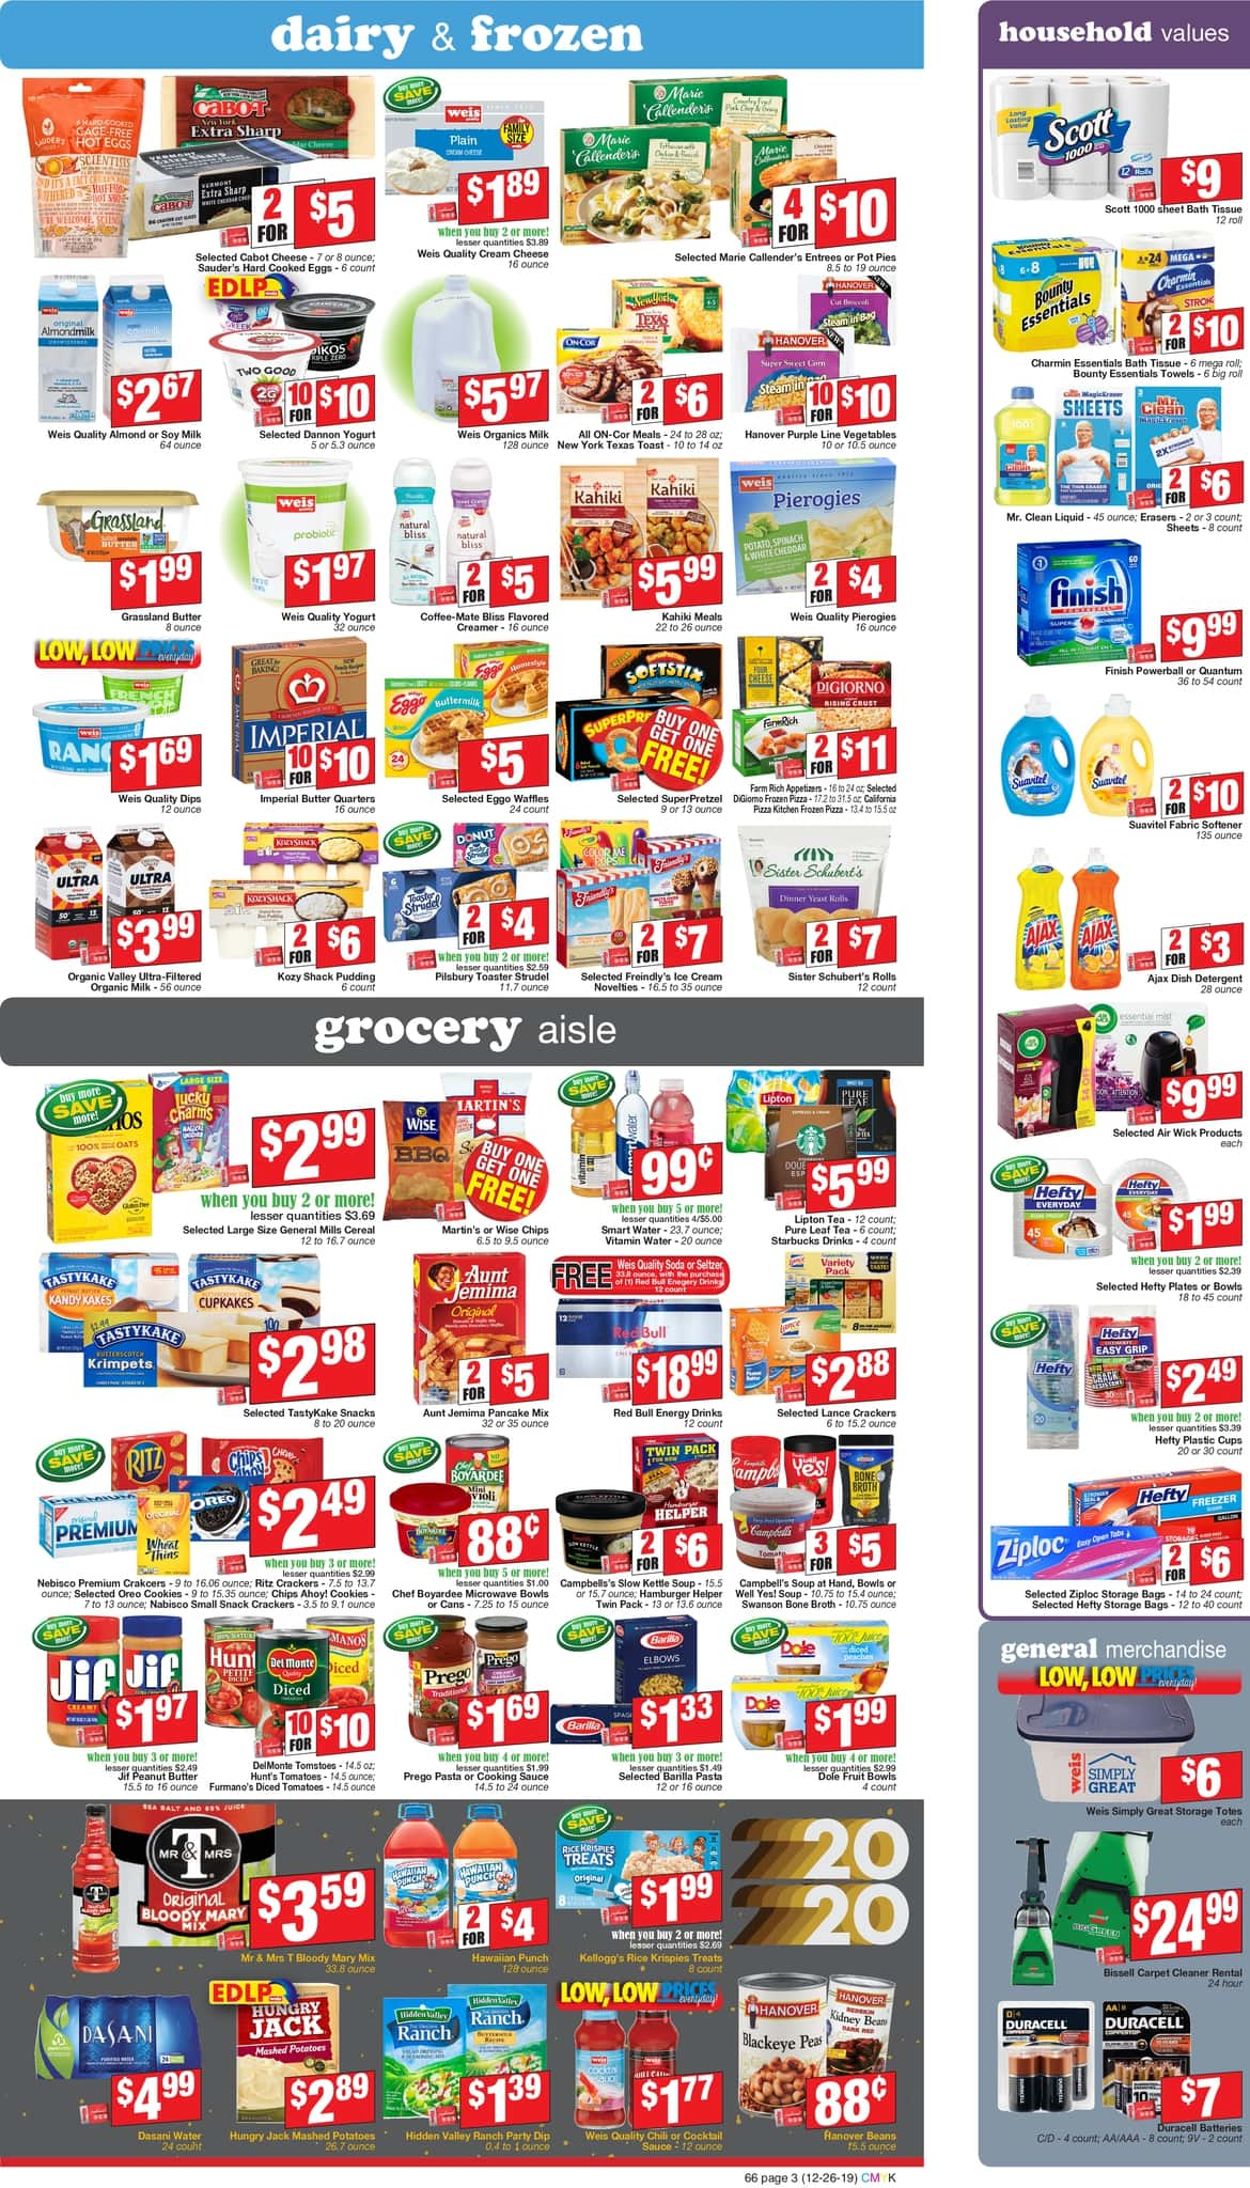 Weis - New Year's Ad 2019/2020 Weekly Ad Circular - valid 12/26-01/02/2020 (Page 3)